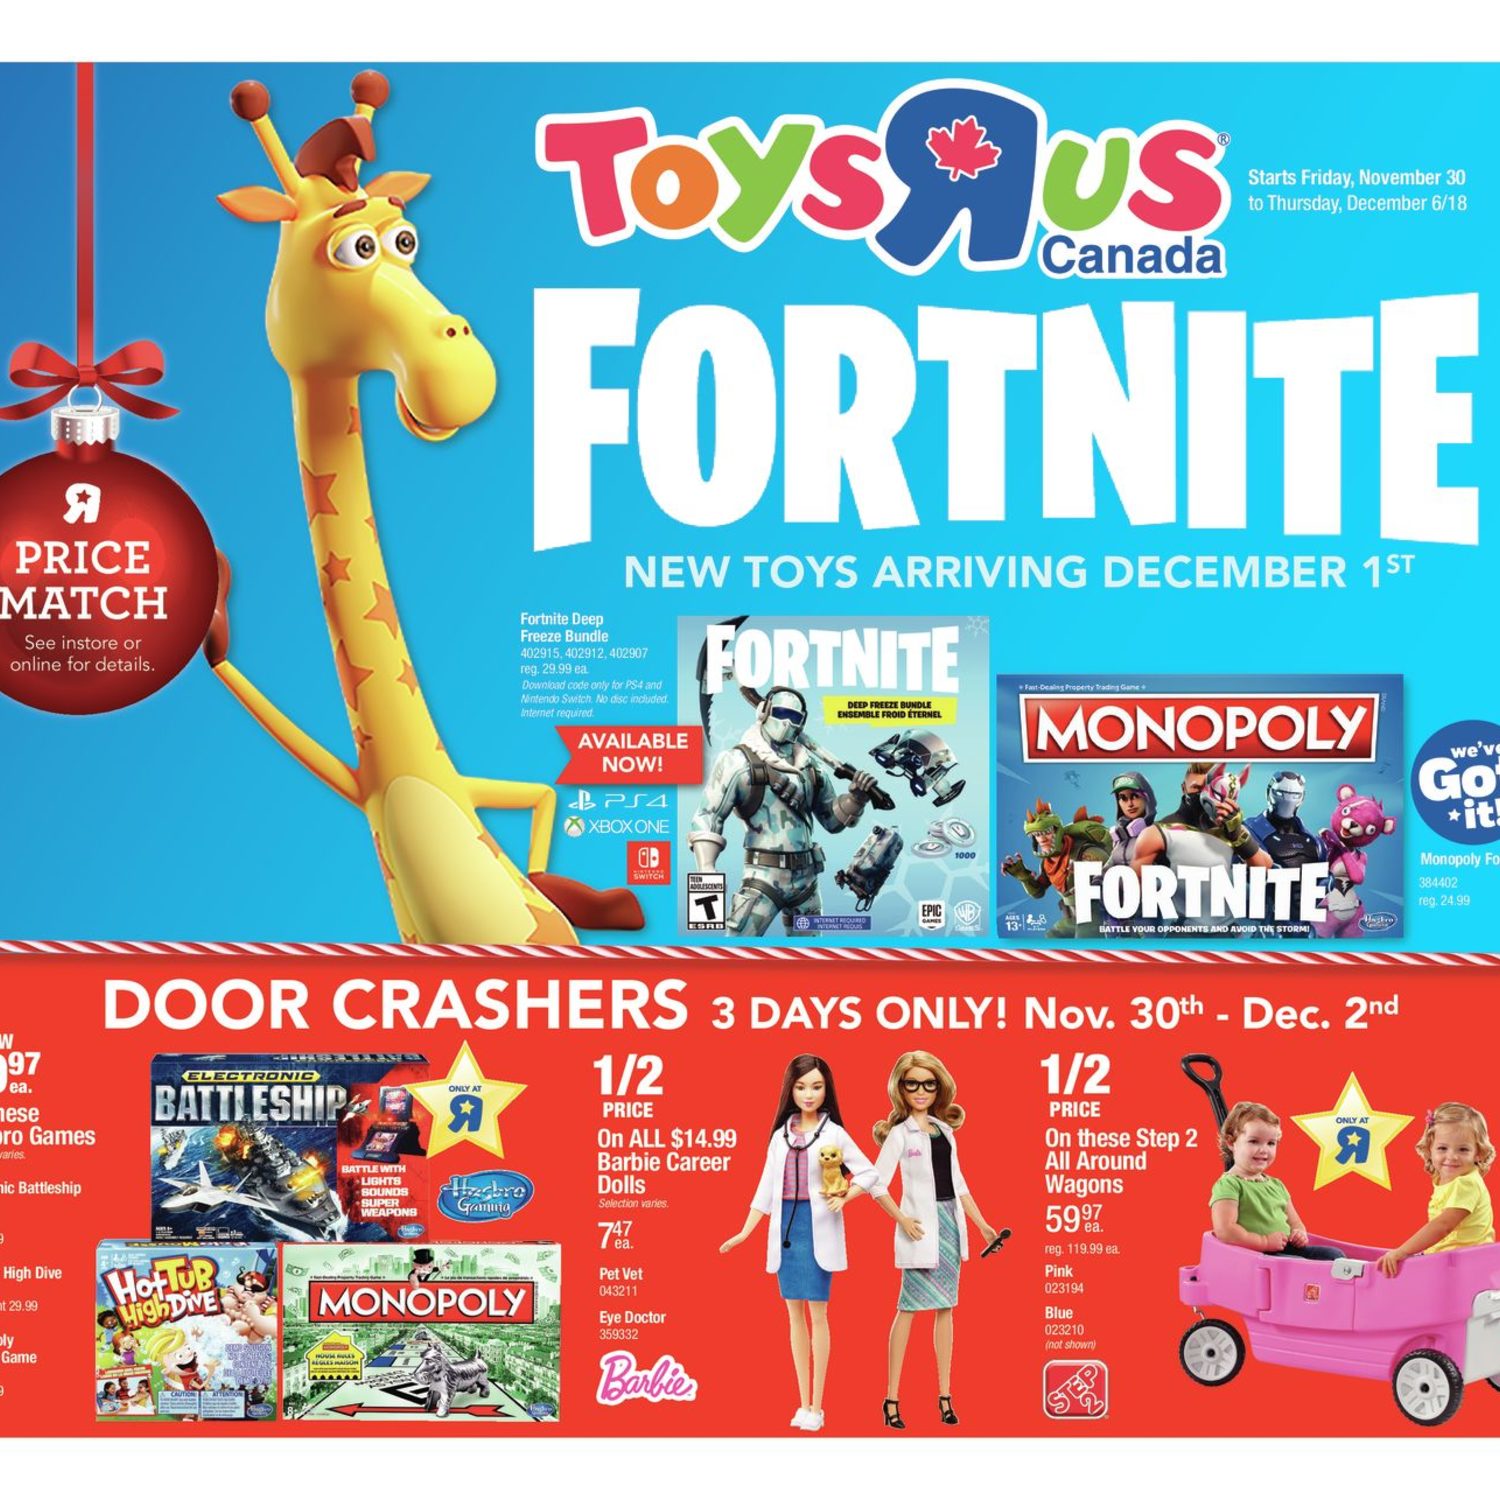 Toys R Us Weekly Flyer Weekly Fortnite Nov 30 Dec 6 Redflagdeals Com - amazon com sandbox game table cover for roblox tablecloth table cover party supplies decorations for birthday party supplies 70 x 42 2 pack kitchen dining